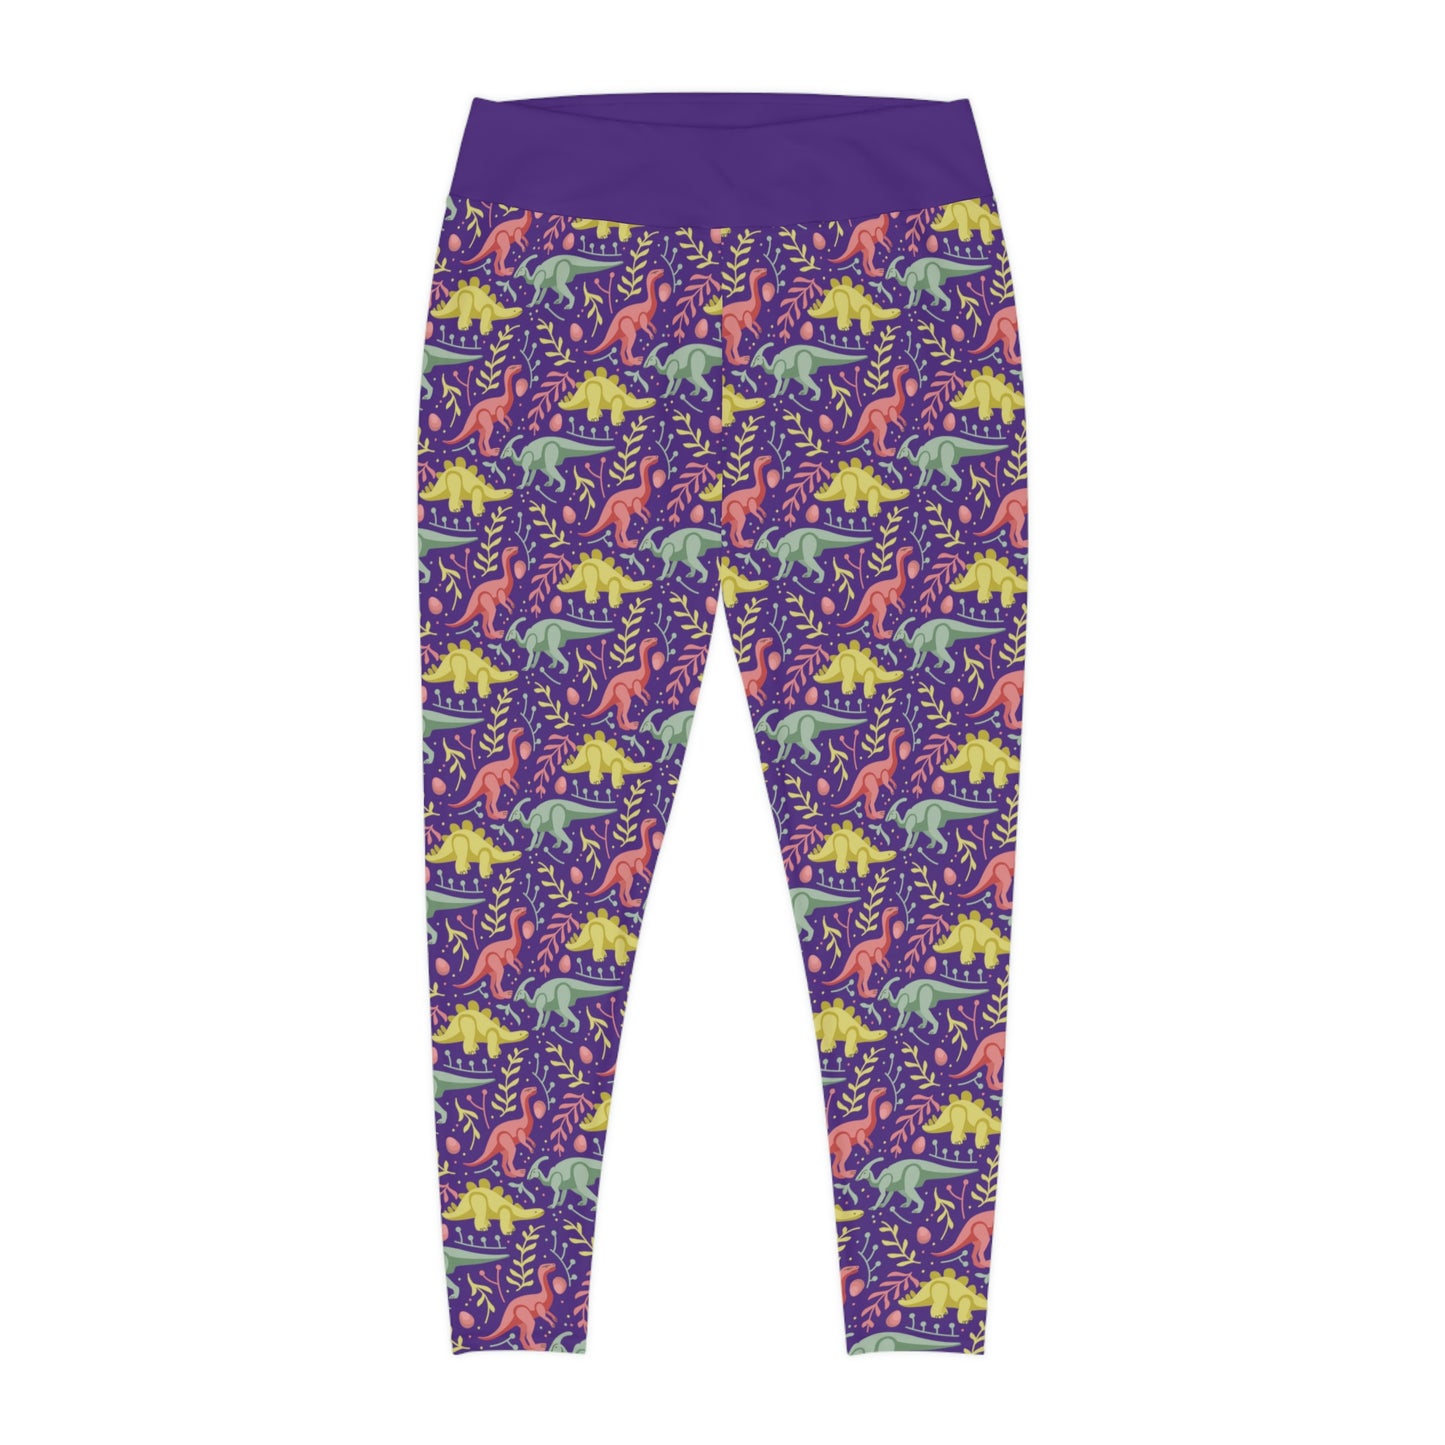 Plus Size Dinosaur Trex Jurassic Park Leggings, One of a Kind - Workout Activewear tights for Wife, Best Friend . Mothers Day or Christmas Gift